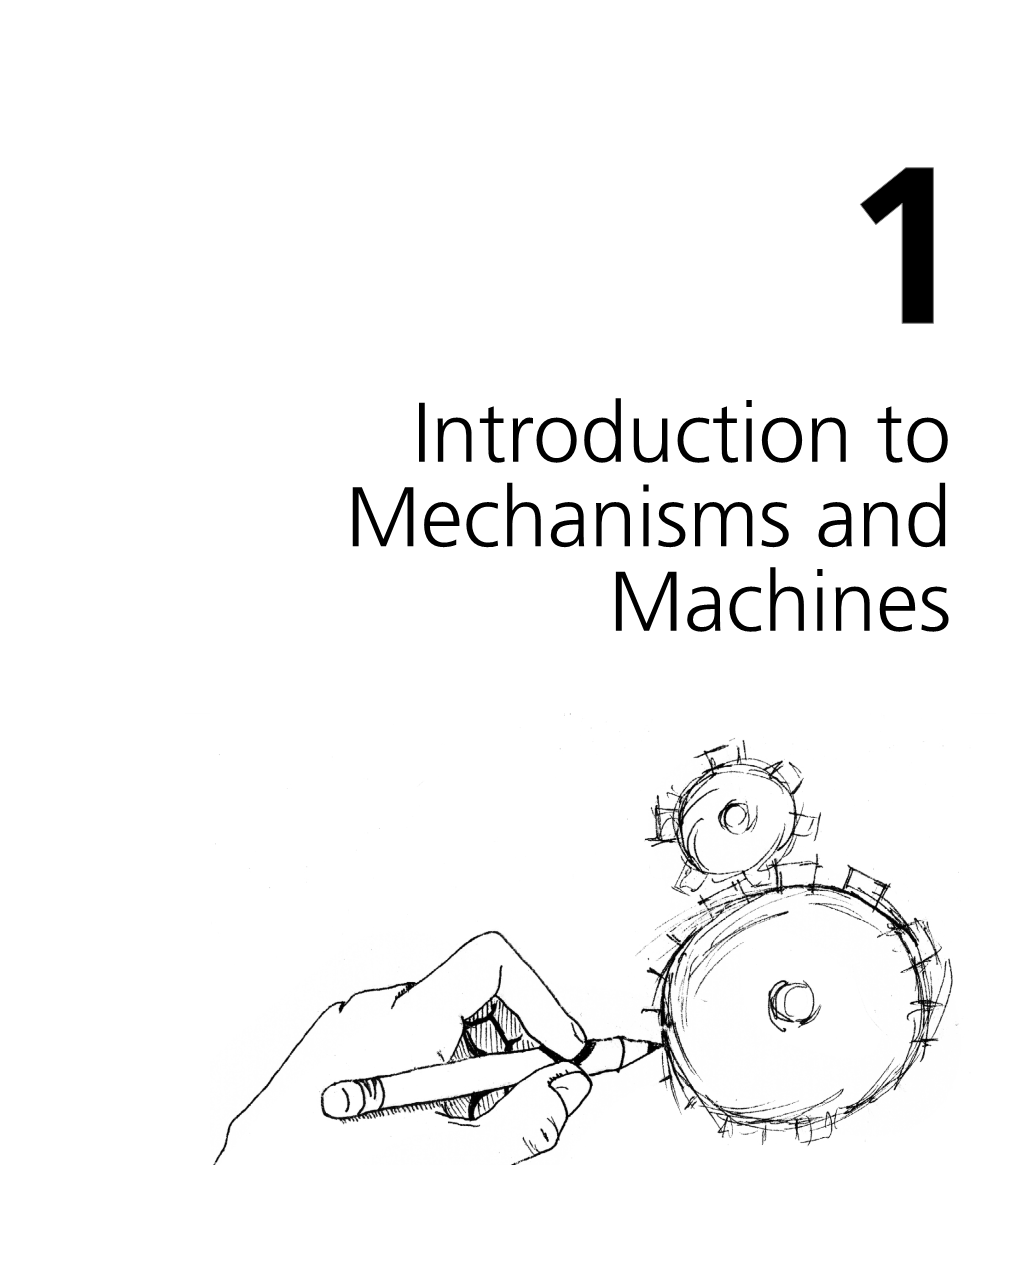 Introduction to Mechanisms and Machines